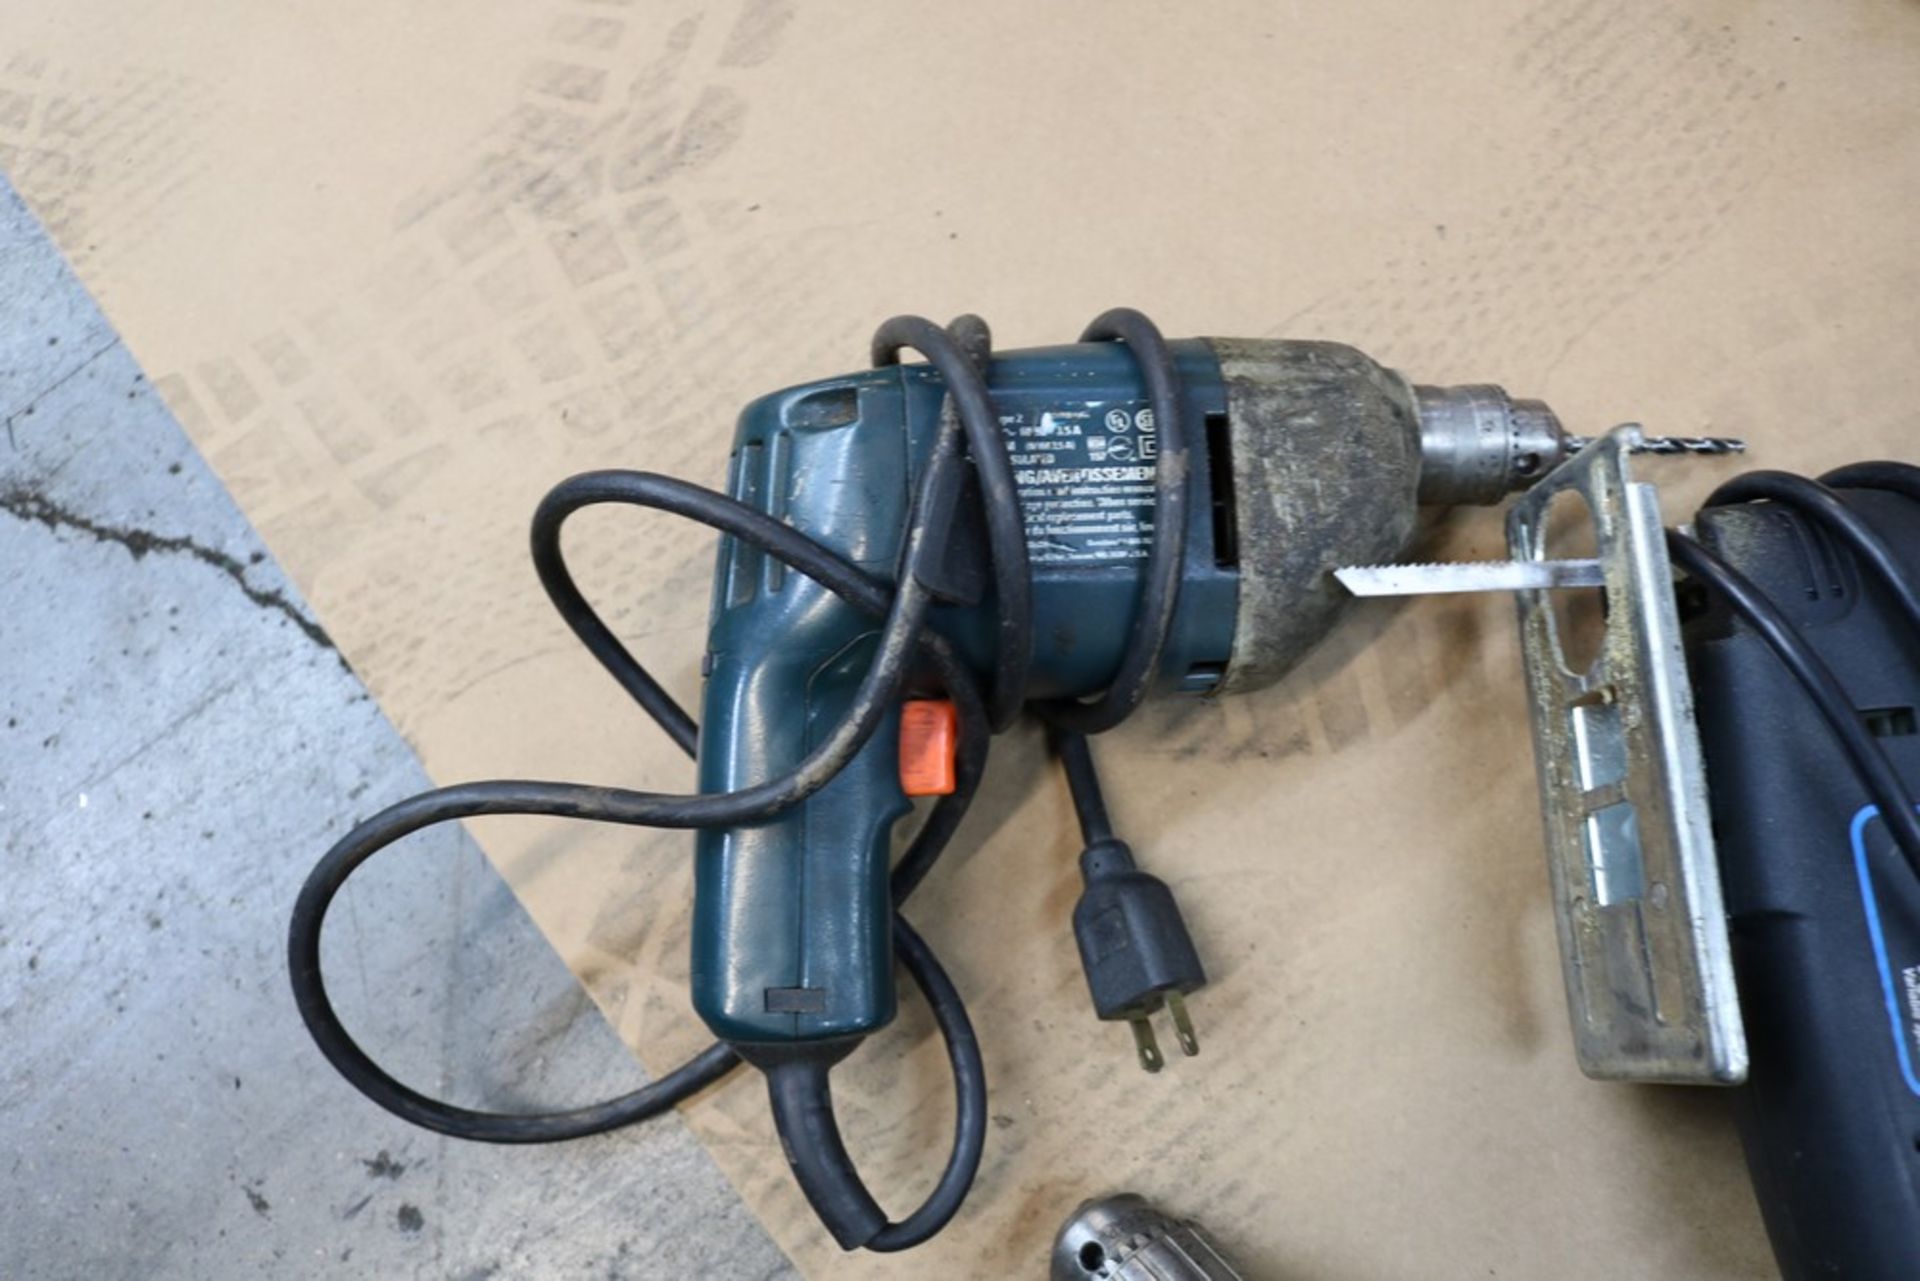 Power Glide Jig Saw, Black and Decker Electric Drill, Heavy Duty Milwaukee 1/2" Power Drill with - Image 3 of 5